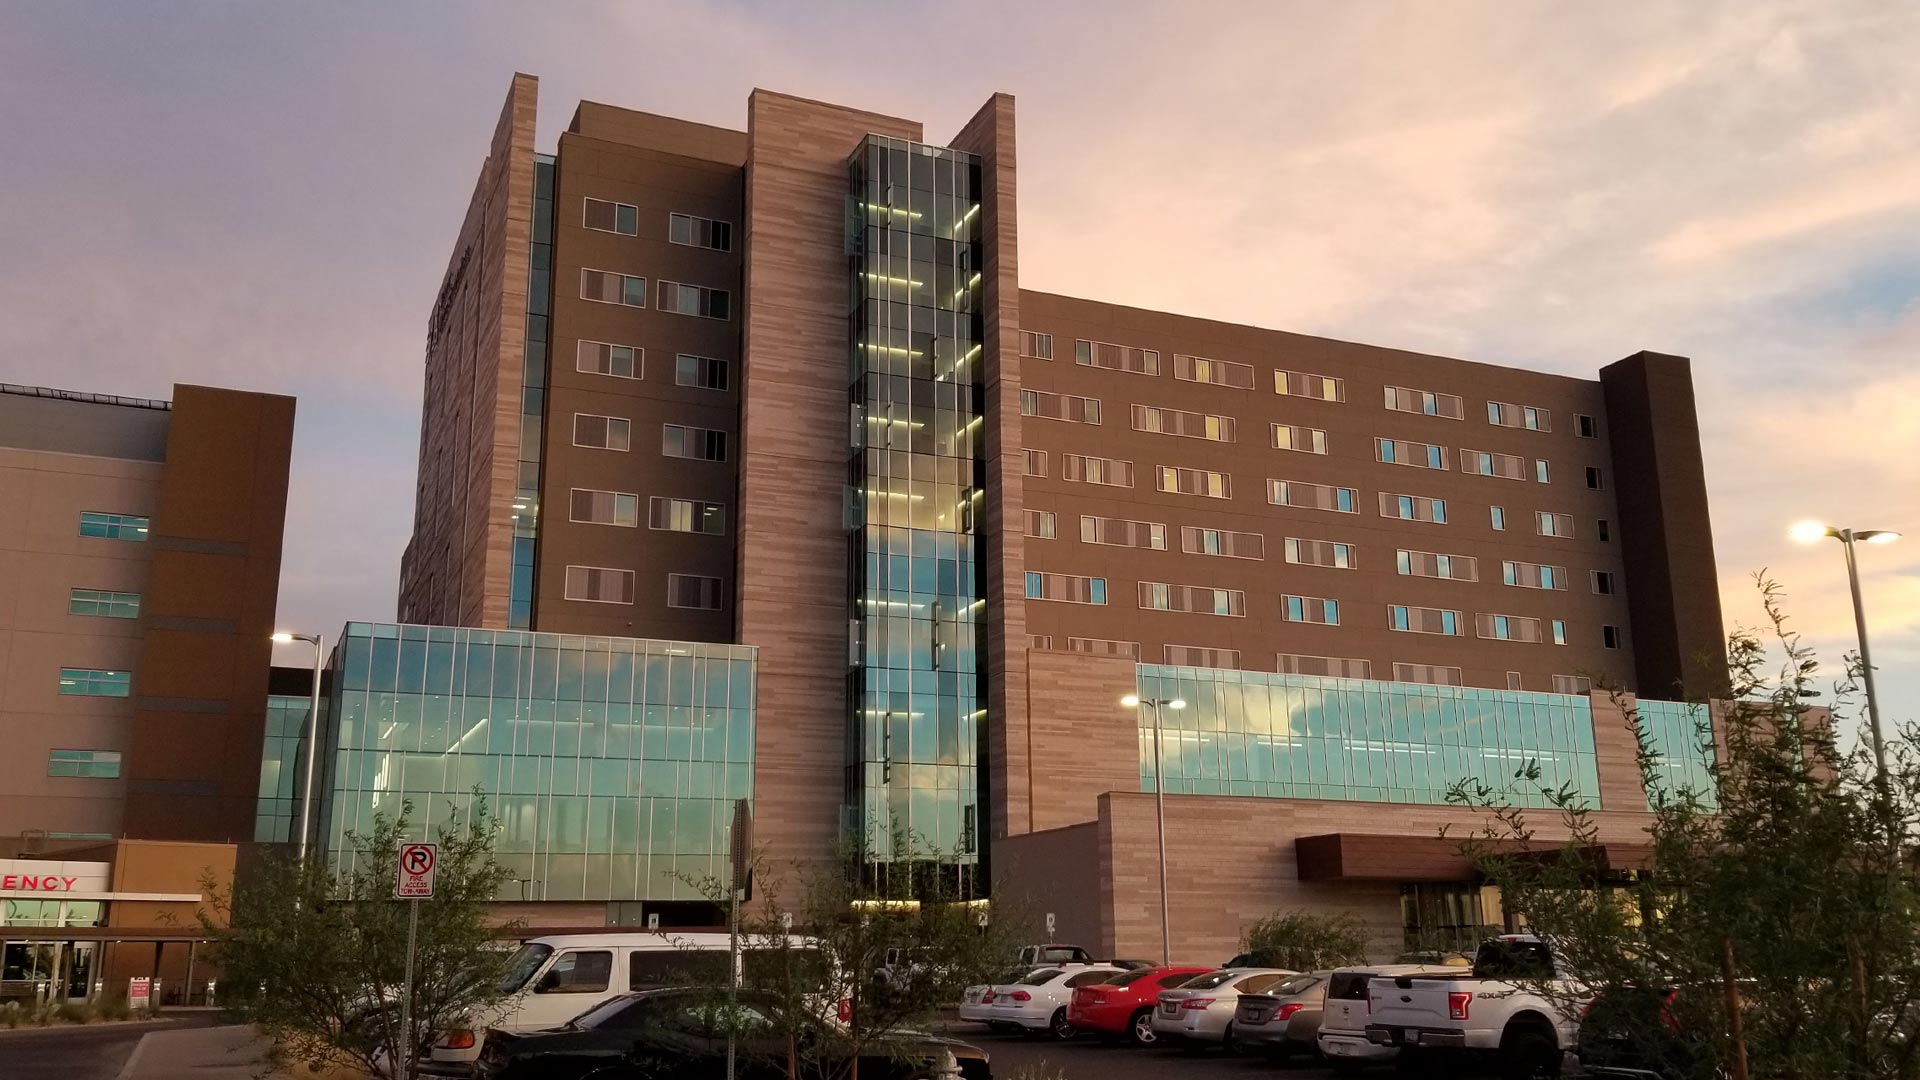 The new tower at Banner University Medical Center opened on April 22, 2019.